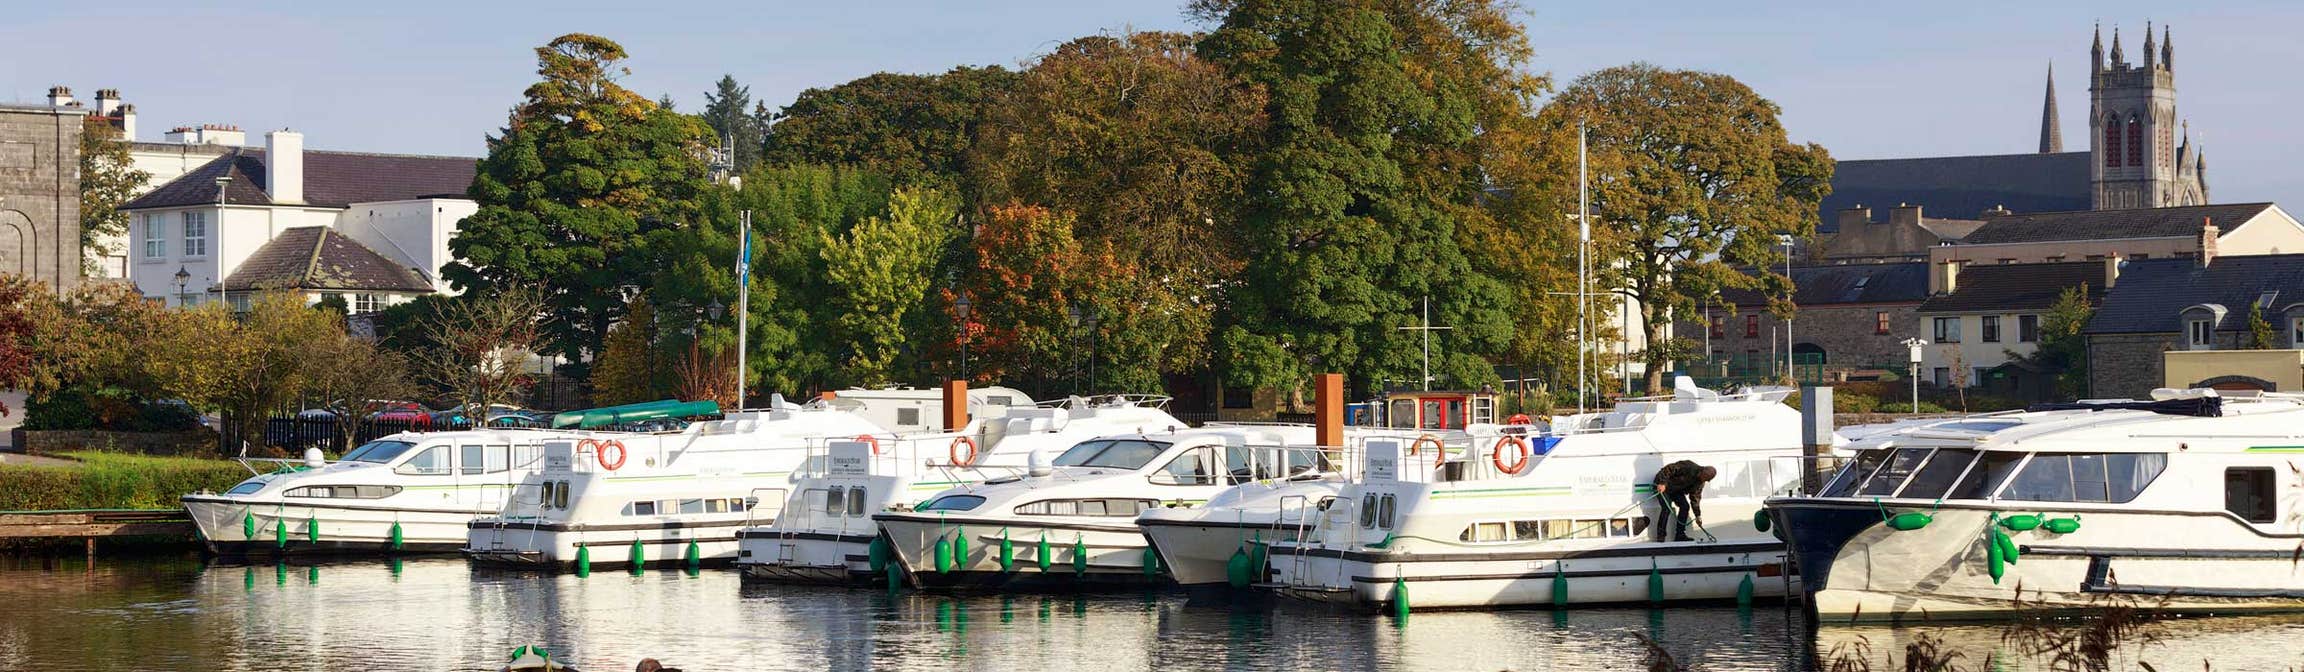 Boats in a marina with a backdrop of trees and a church in Carrick-on-Shannon, County Leitrim